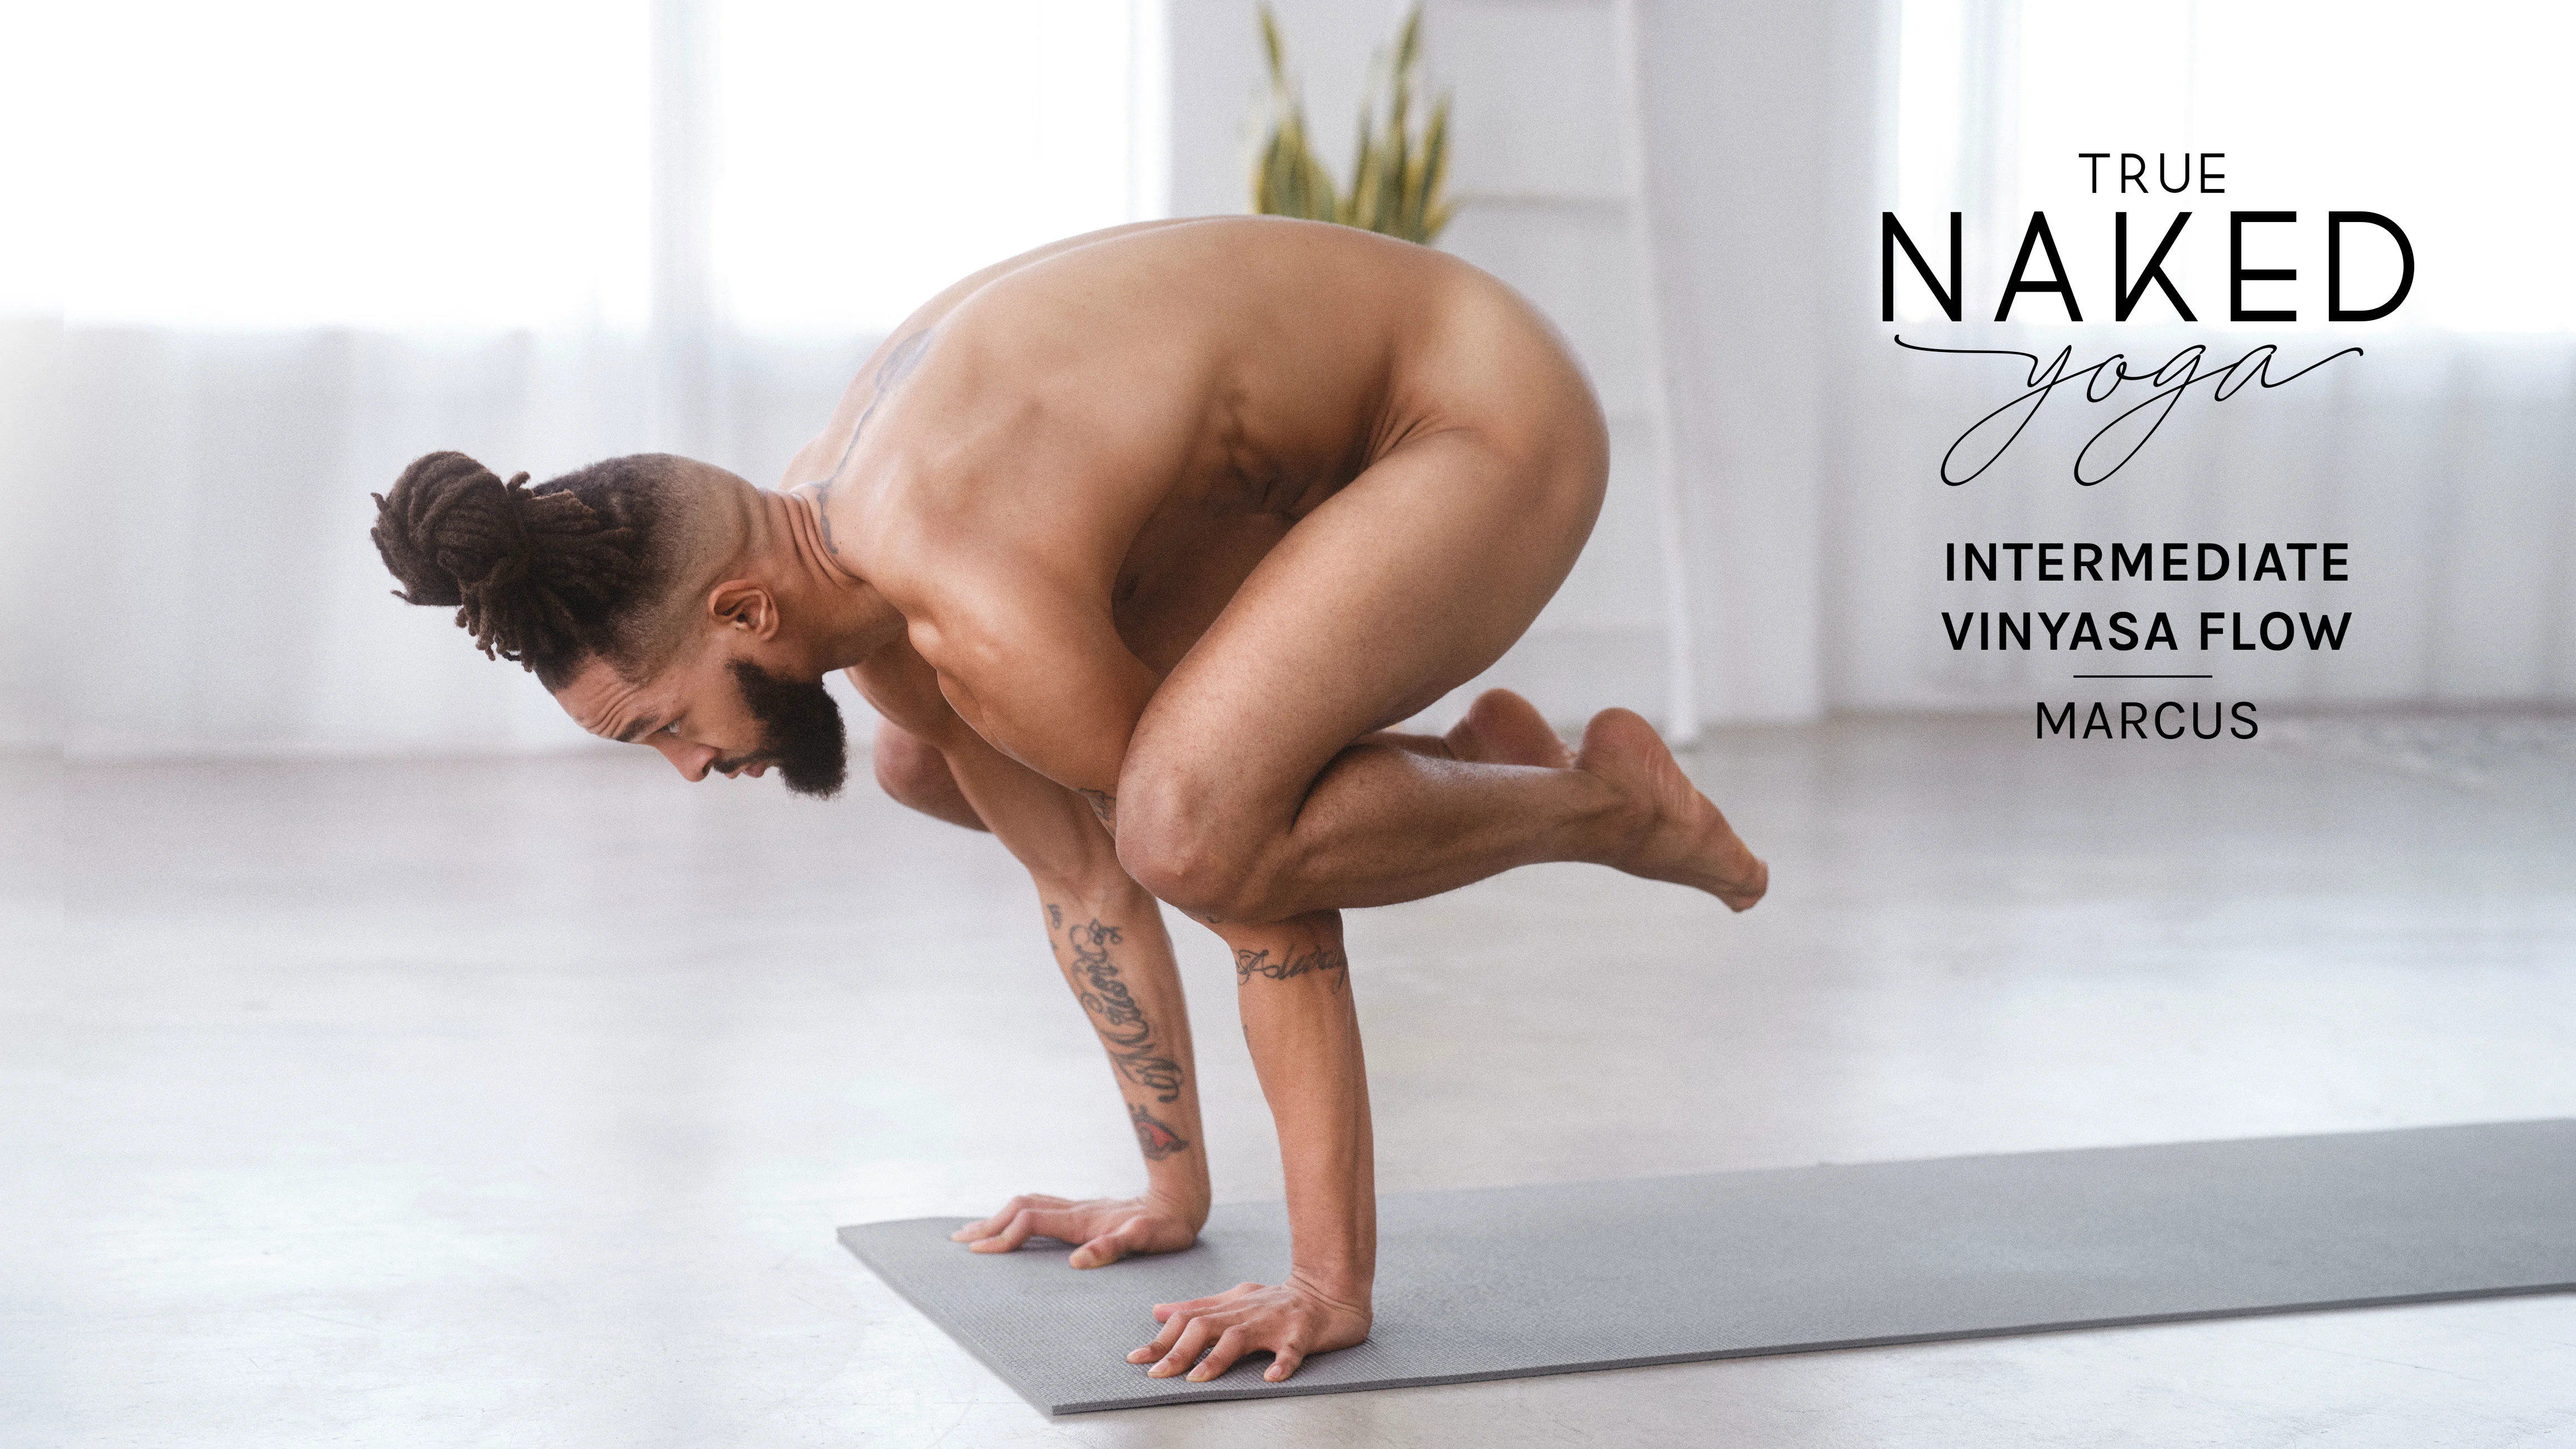 cole willis recommends nude male yoga videos pic